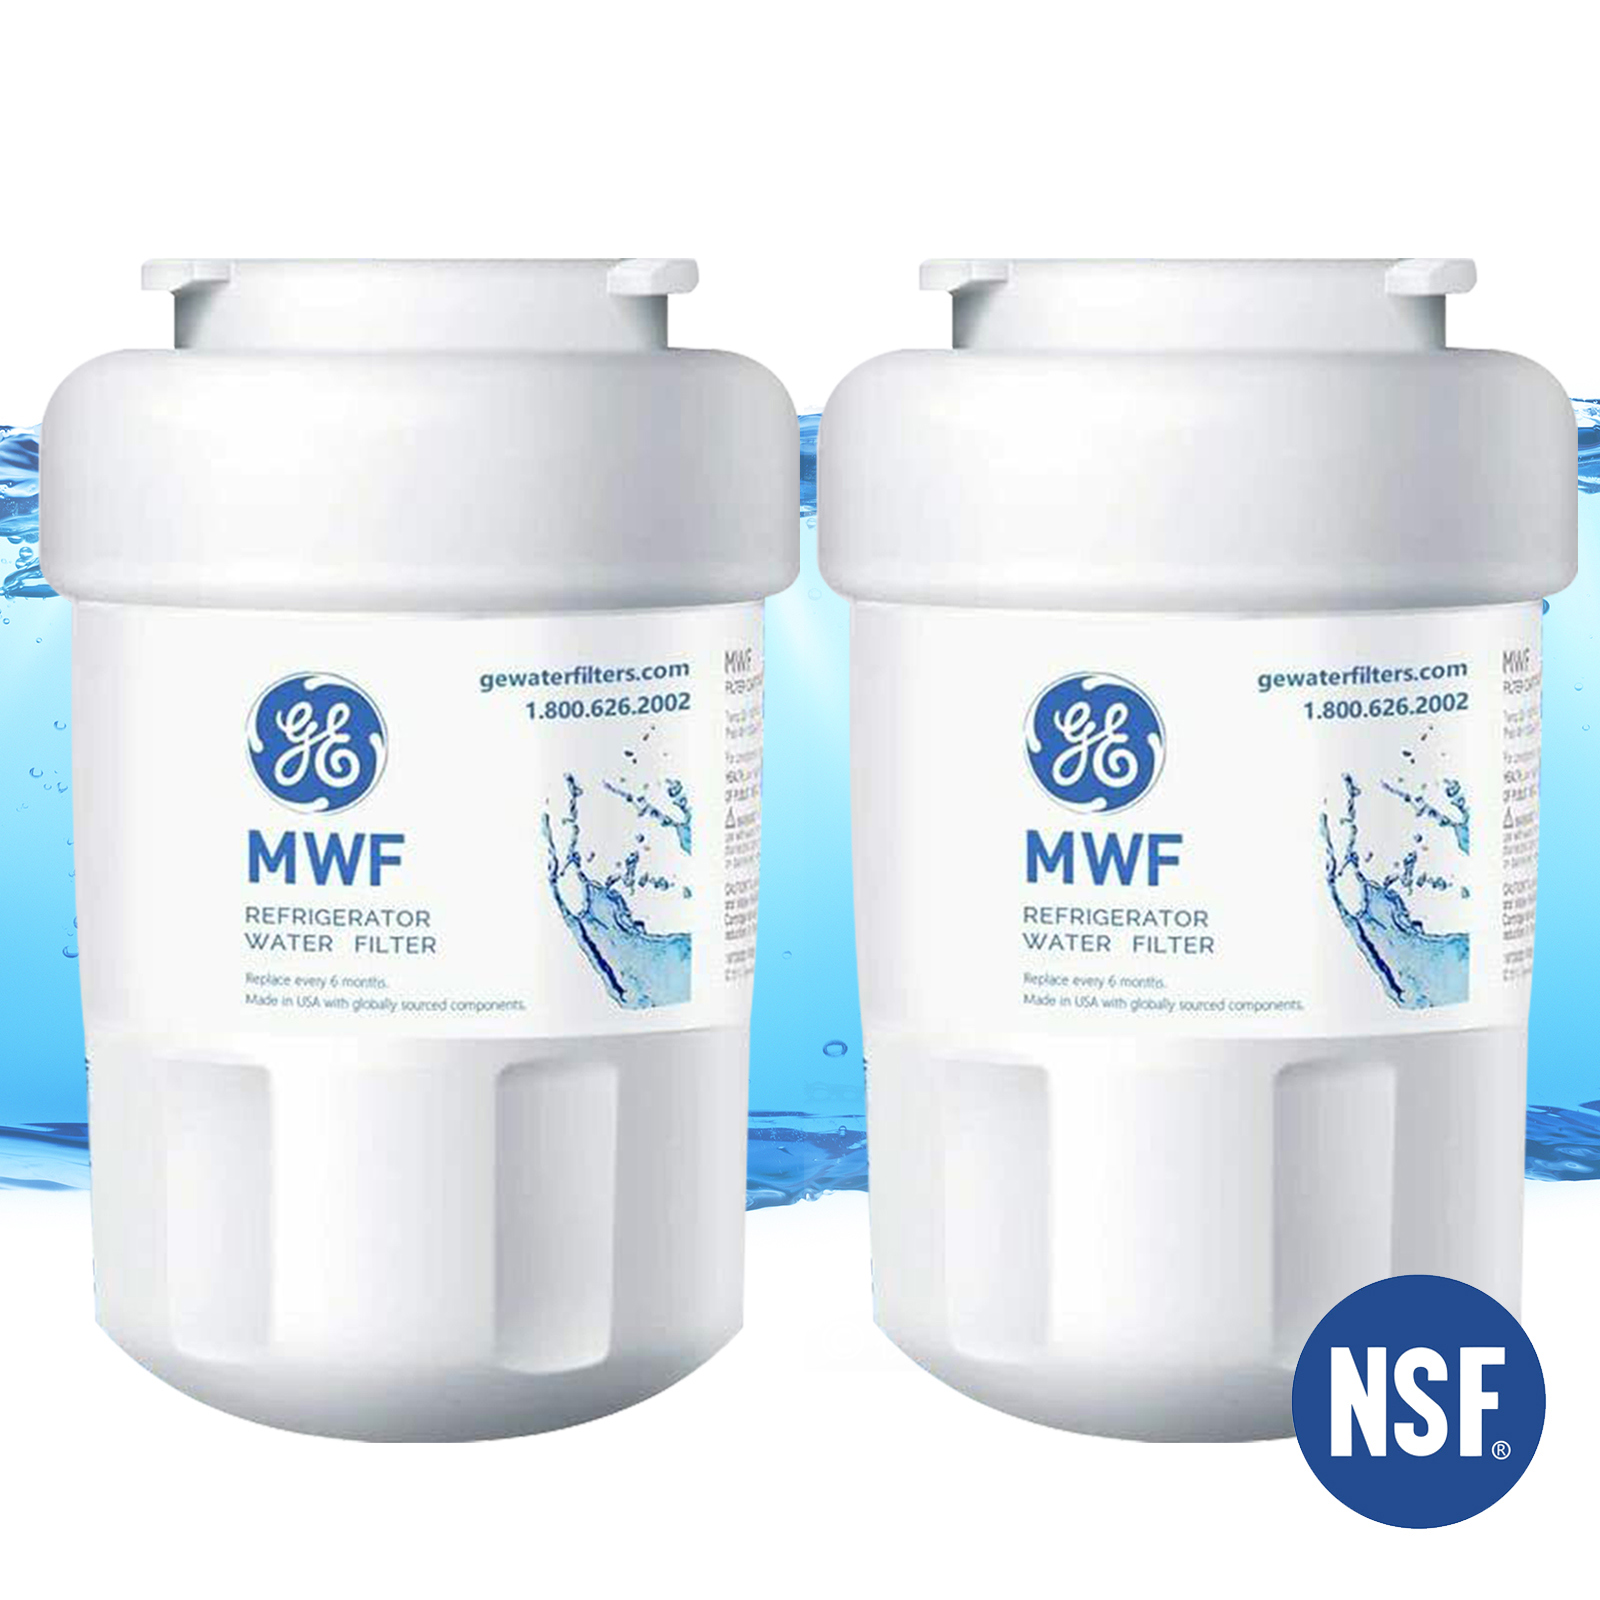 12 PCS MWF Fridge Water Filter Replacement for Refrigerator,Compatible with SmartWater MWF, MWFINT, MWFP, MWFA,GWF, GWFA Refrigerator Water Filter - image 1 of 7